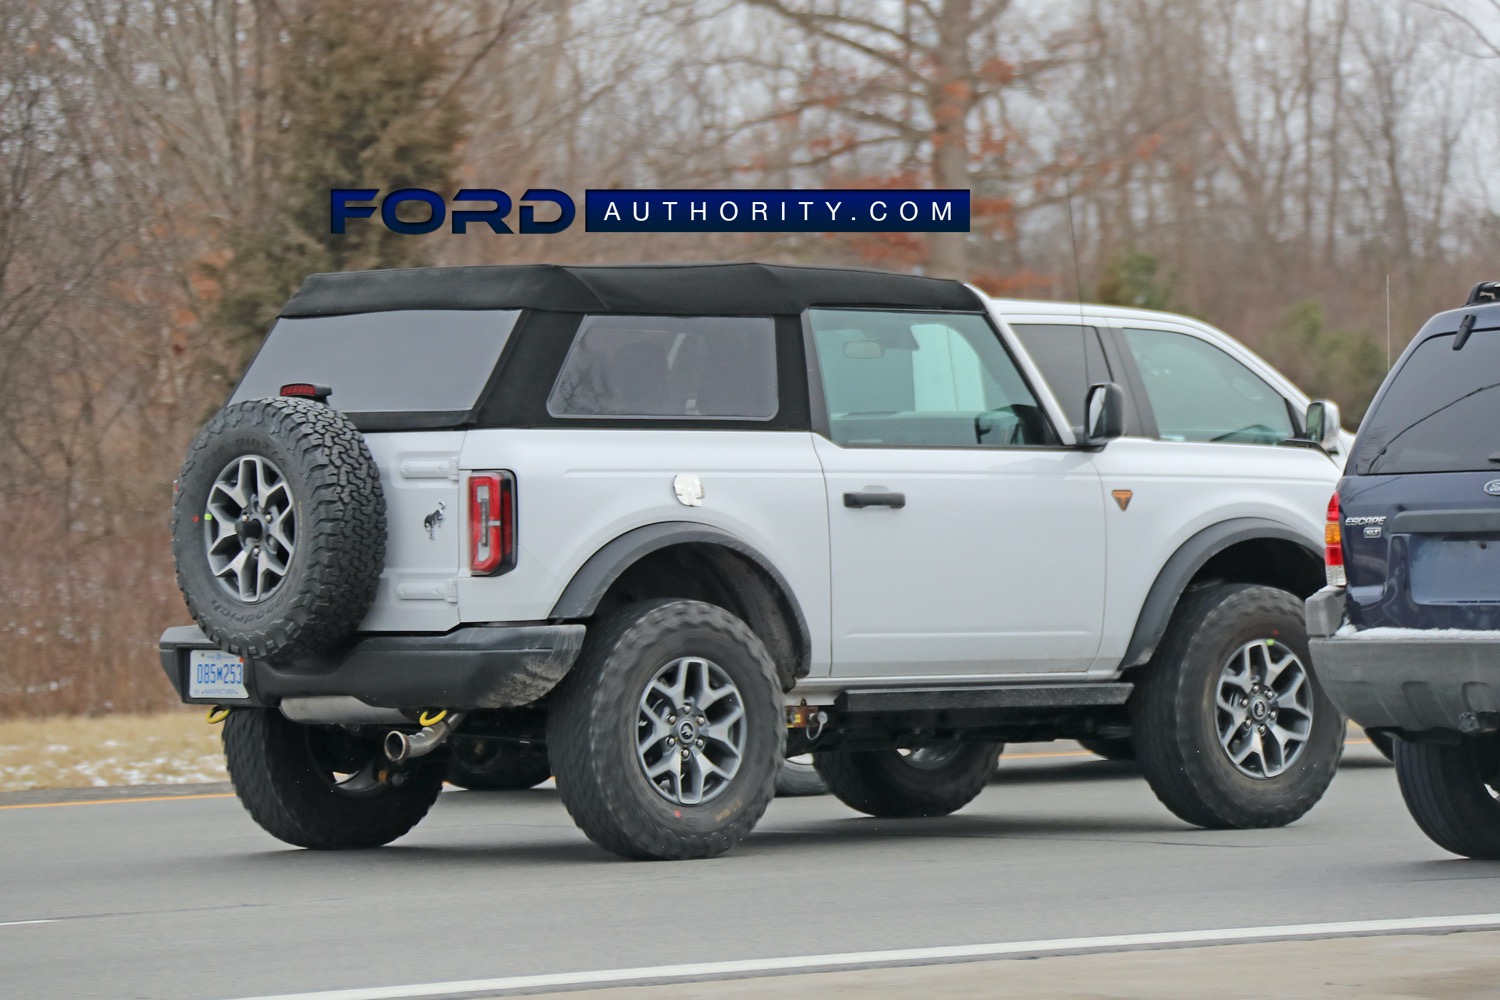 2021 Ford Bronco Two-Door Badlands With Fastback Soft Top Spotted